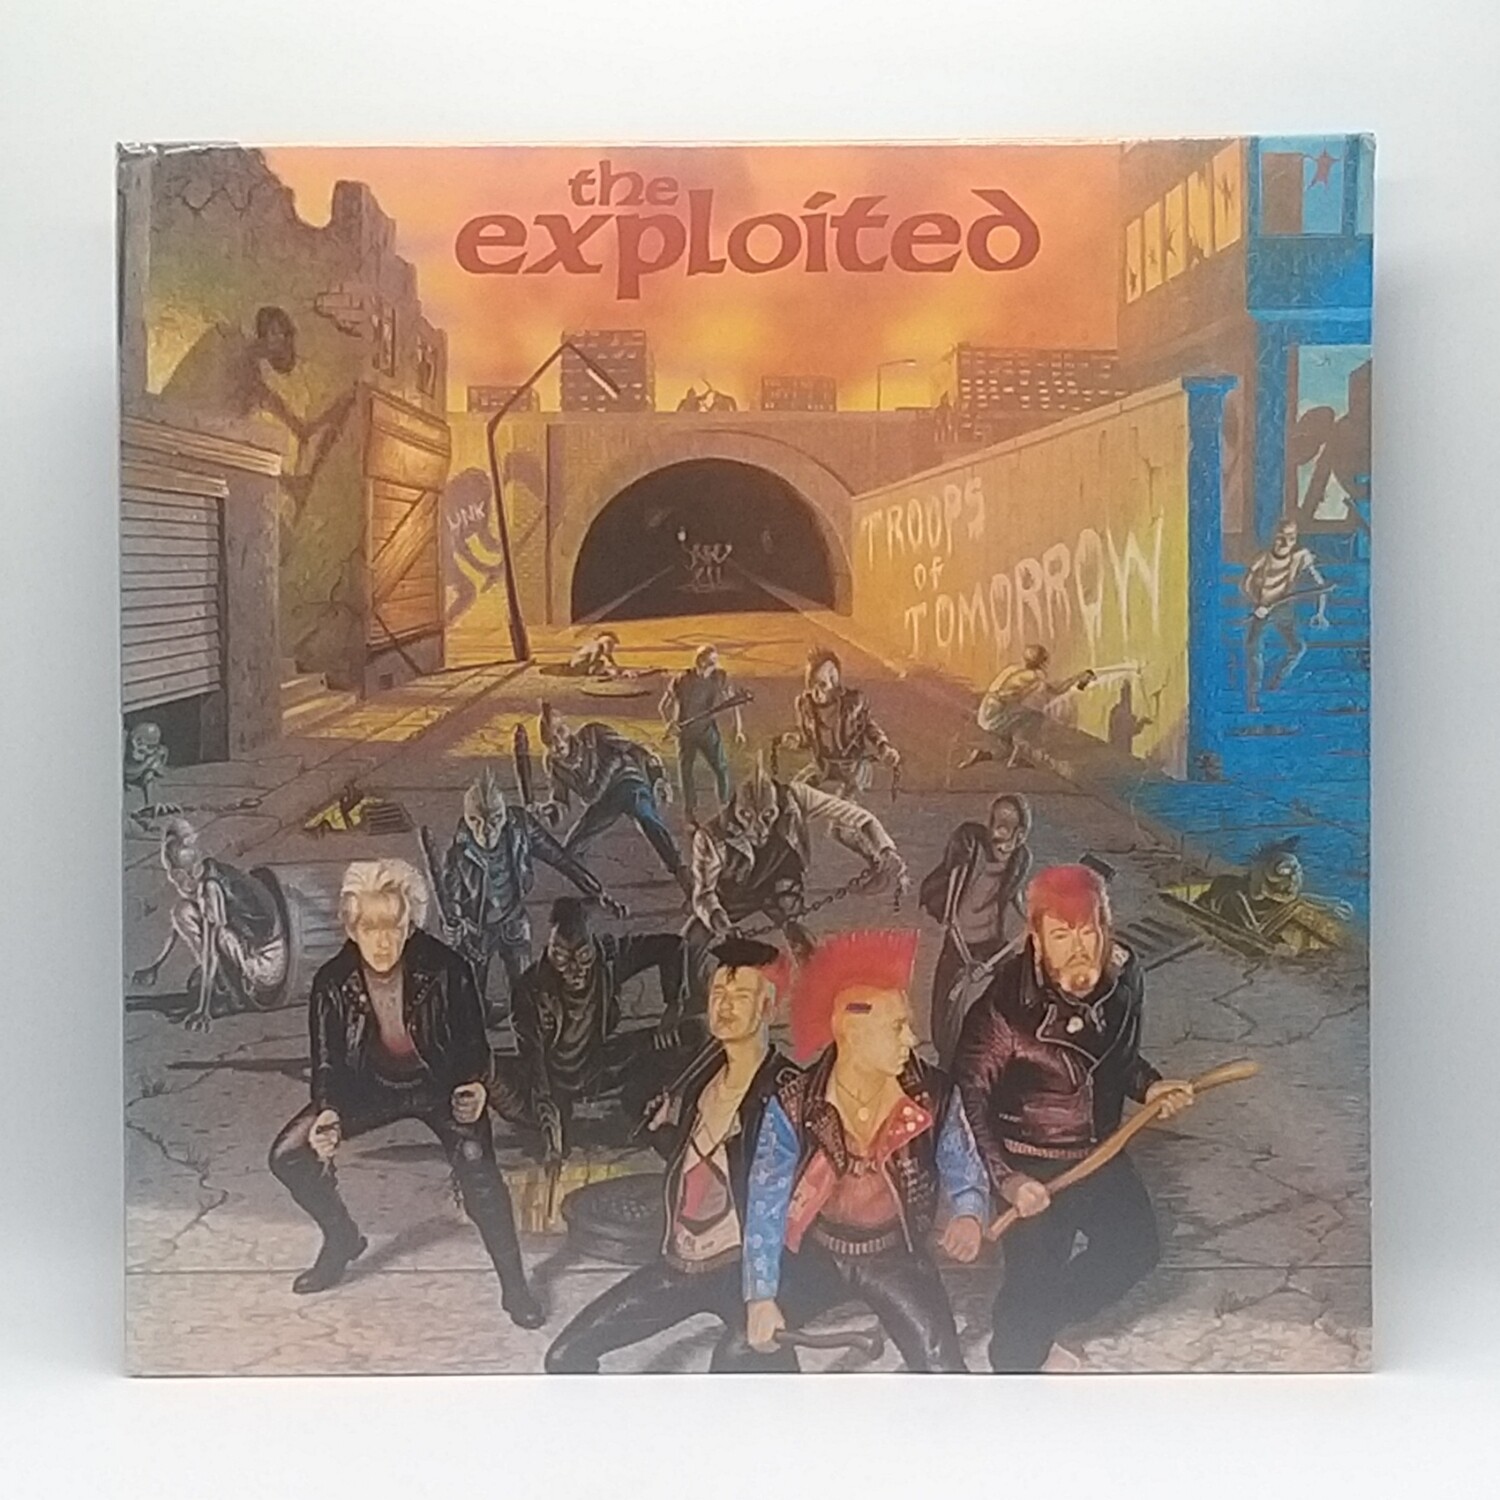 THE EXPLOITED -TROOPS OF TOMORROW- LP